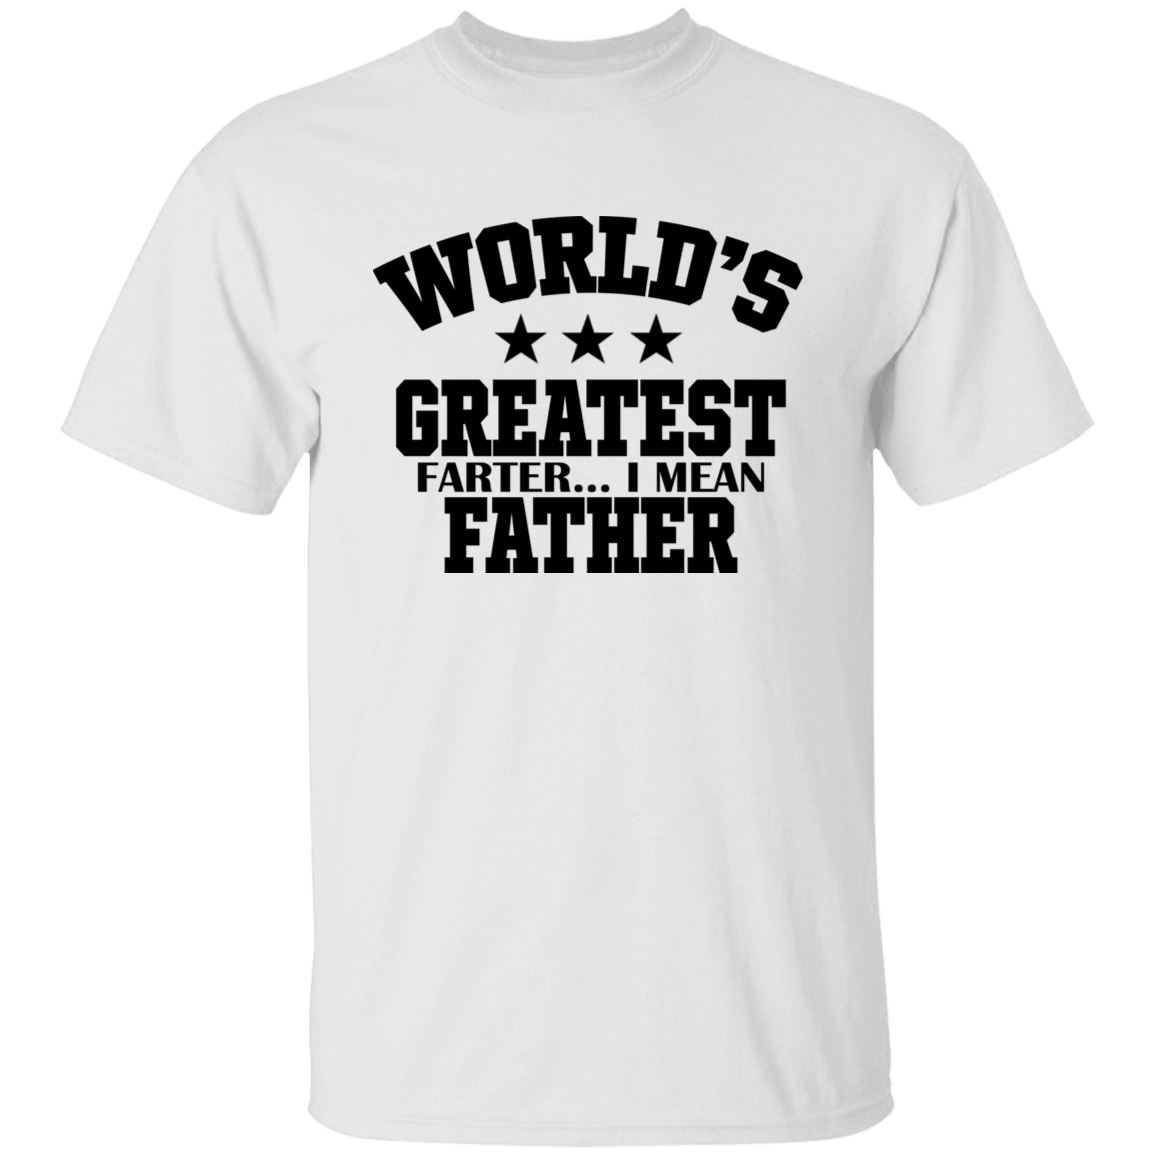 World's Greatest Farter I Mean Father, Funny Father Gift Unisex T-Shirt, Sweatshirt, Hoodie